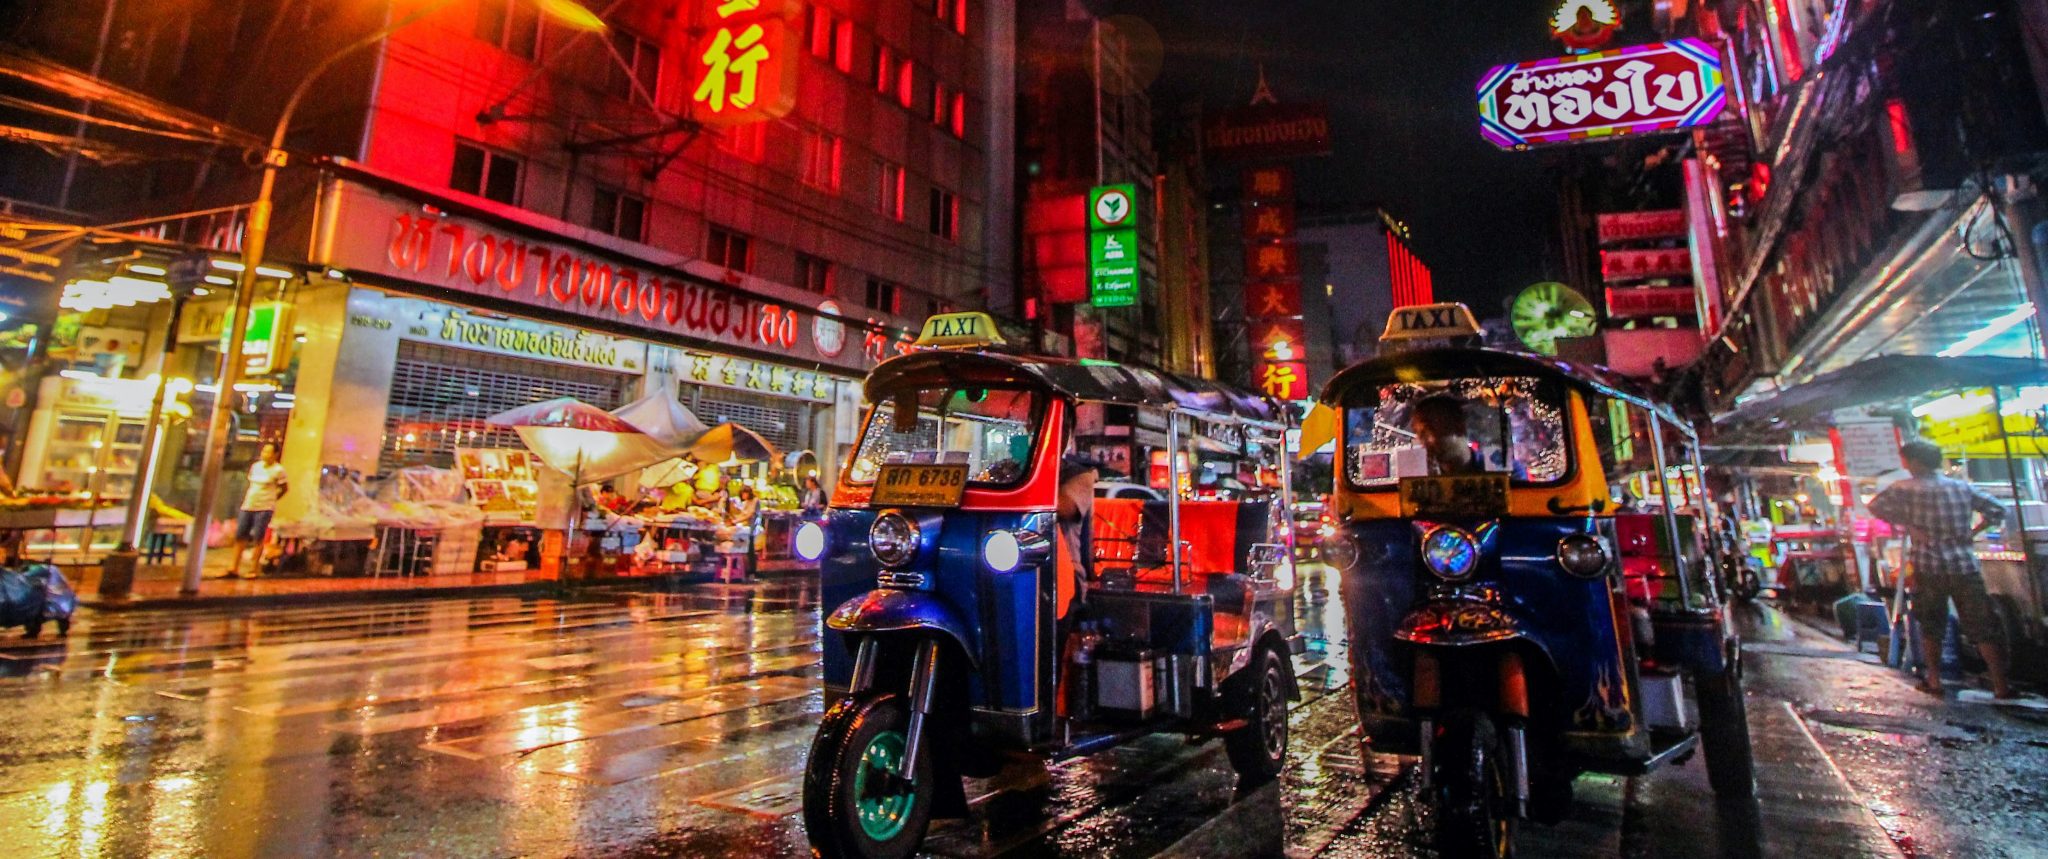 How to Spend 48 Hours in Bangkok